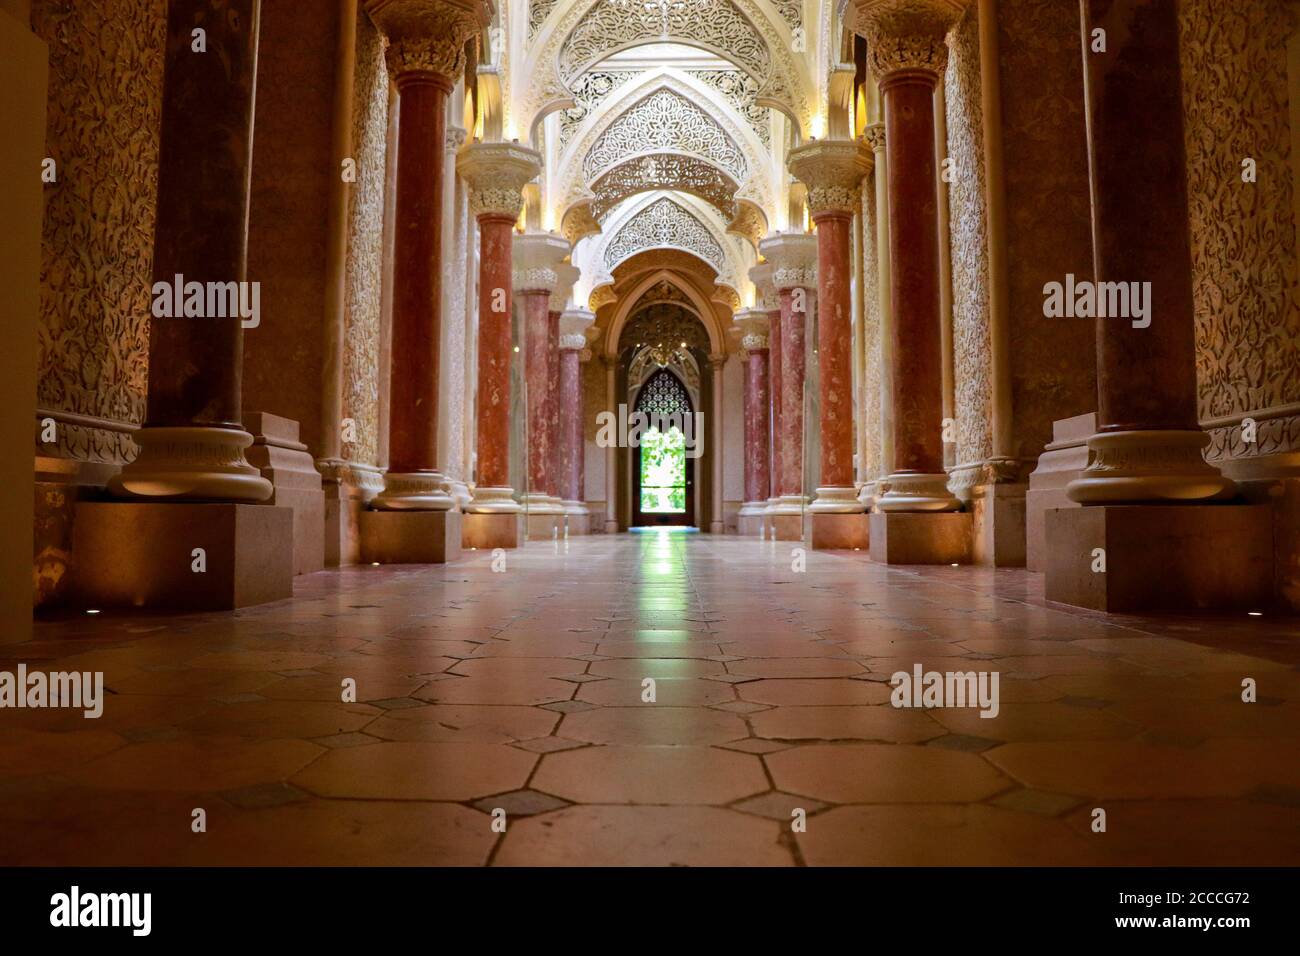 Amazing palace interior with a window to the garden in background.  Monserrate Palace in Sintra, Portugal Stock Photo - Alamy